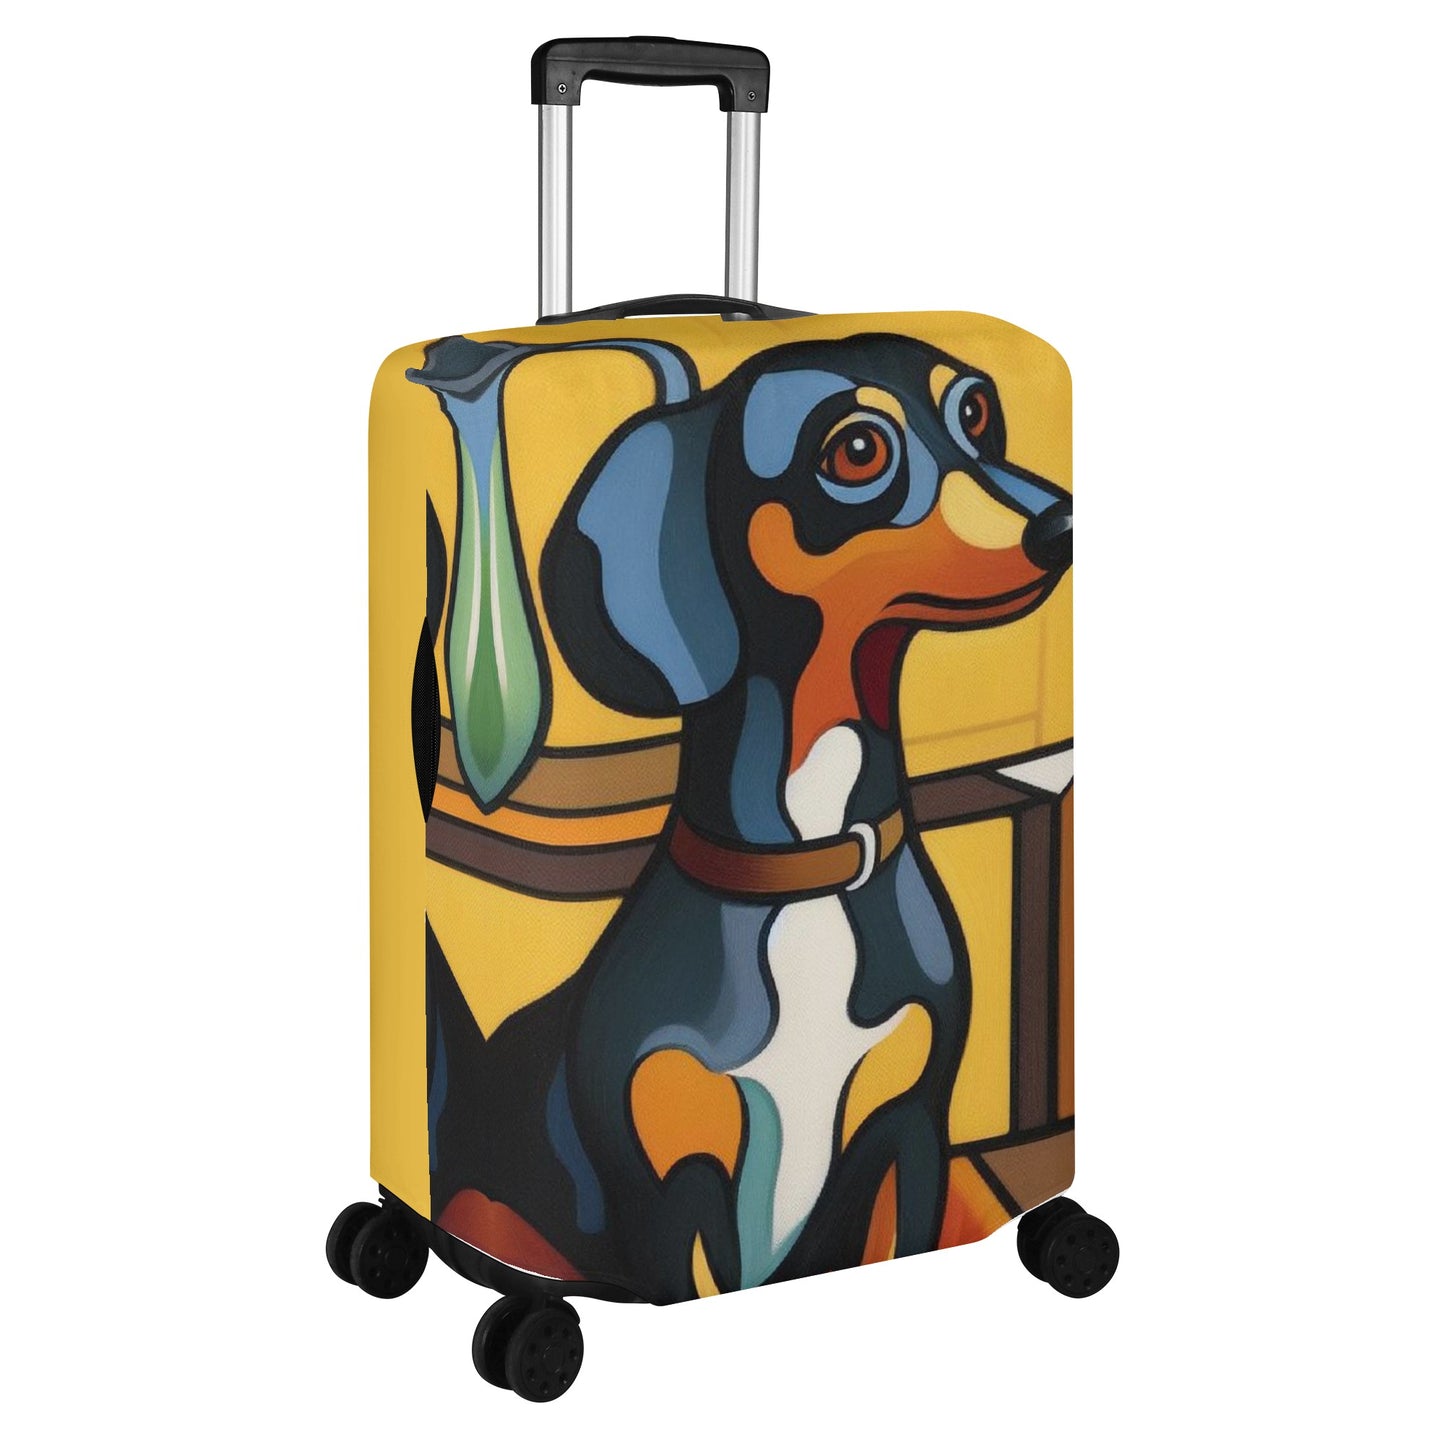 Giddy - Luggage Cover